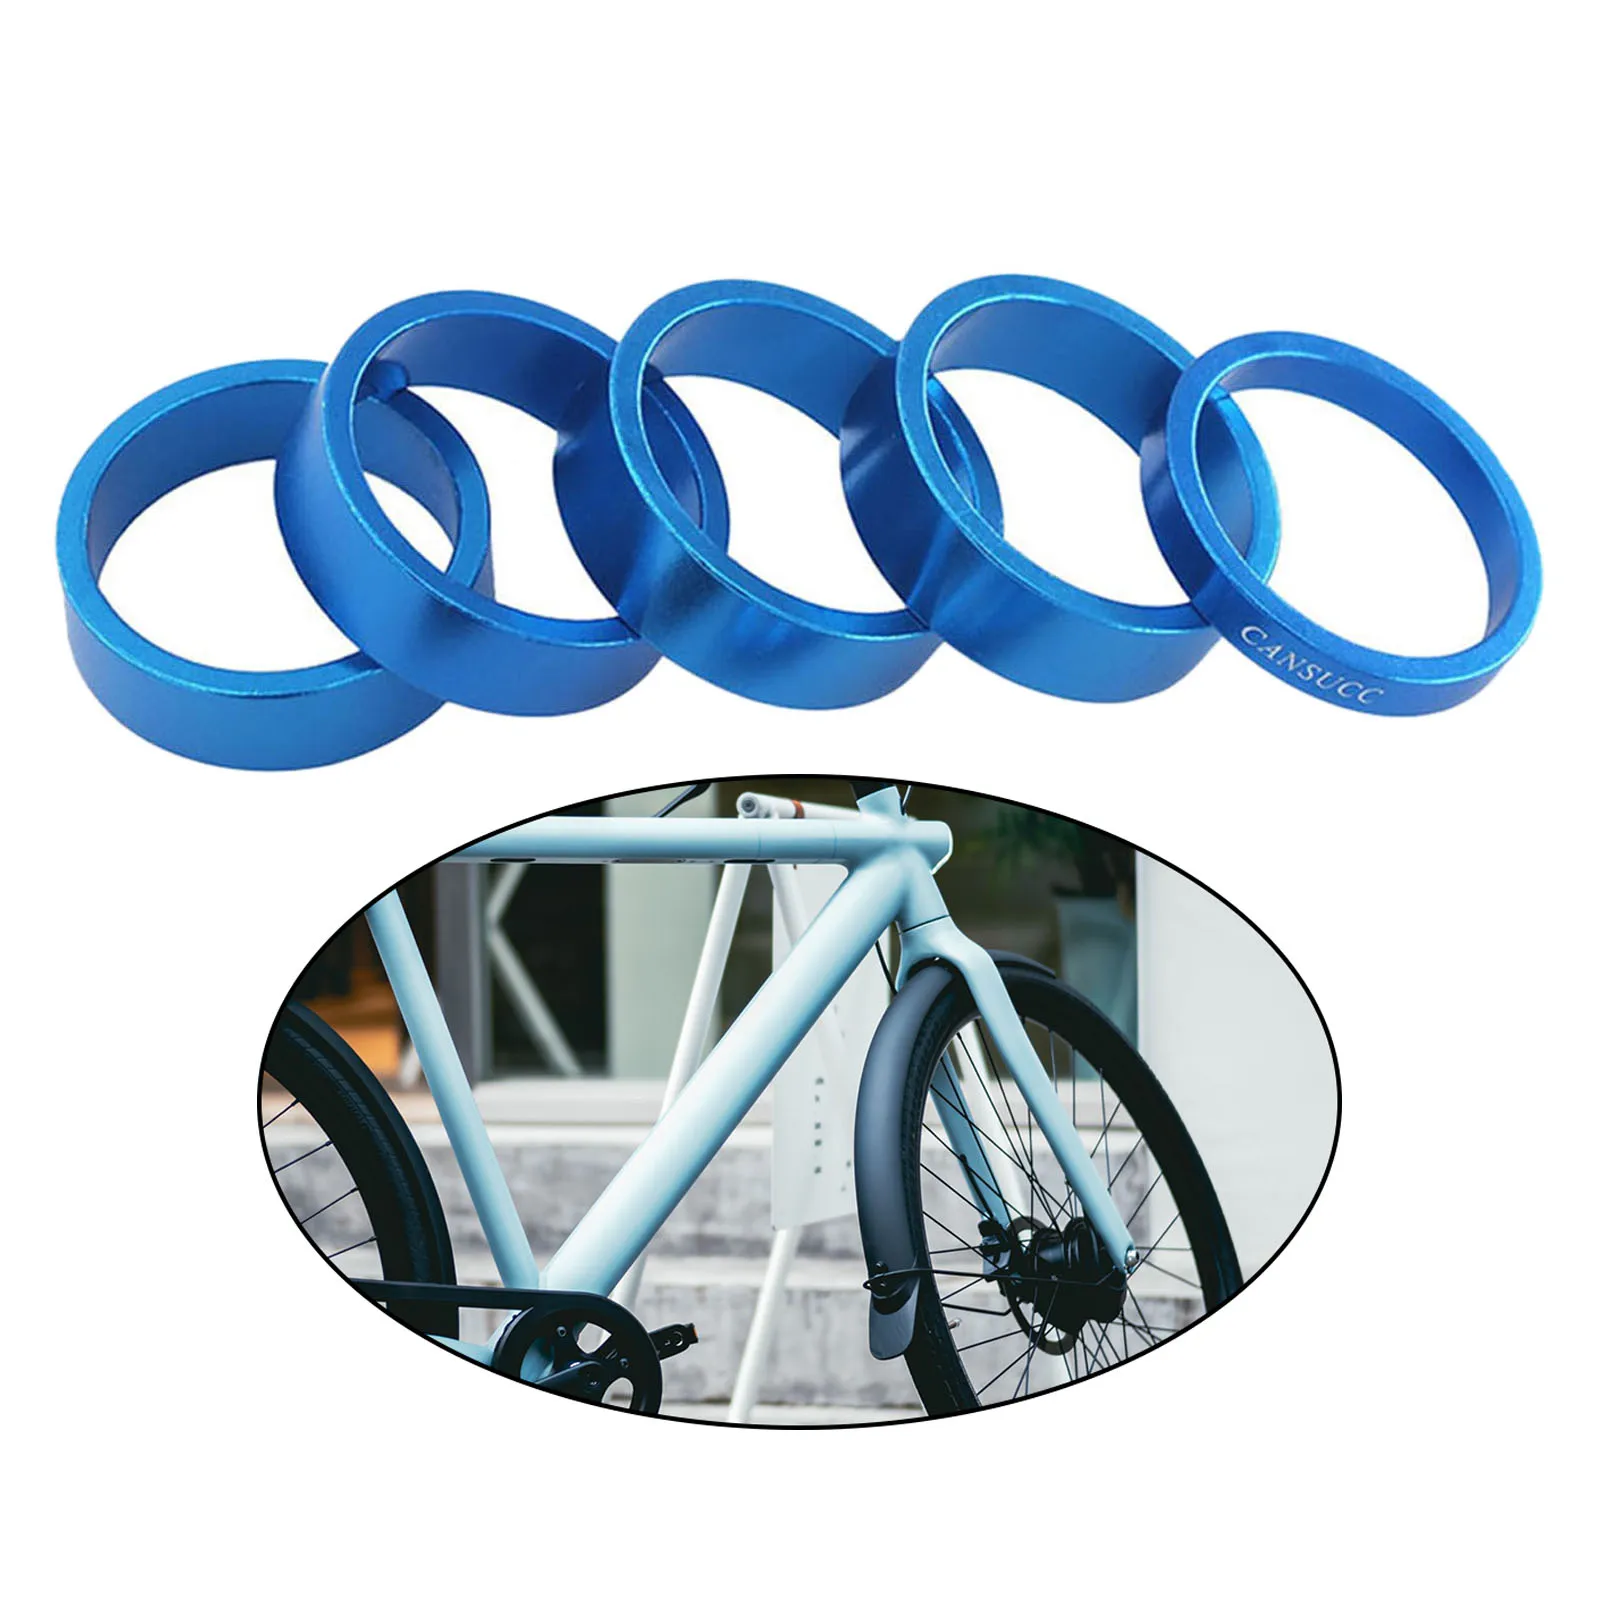 6Pcs/lot Bike Fork Washer Stem Spacers Aluminum Alloy Bicycle Headset Washer Raise Handlebar 2-10mm For MTB Cycling